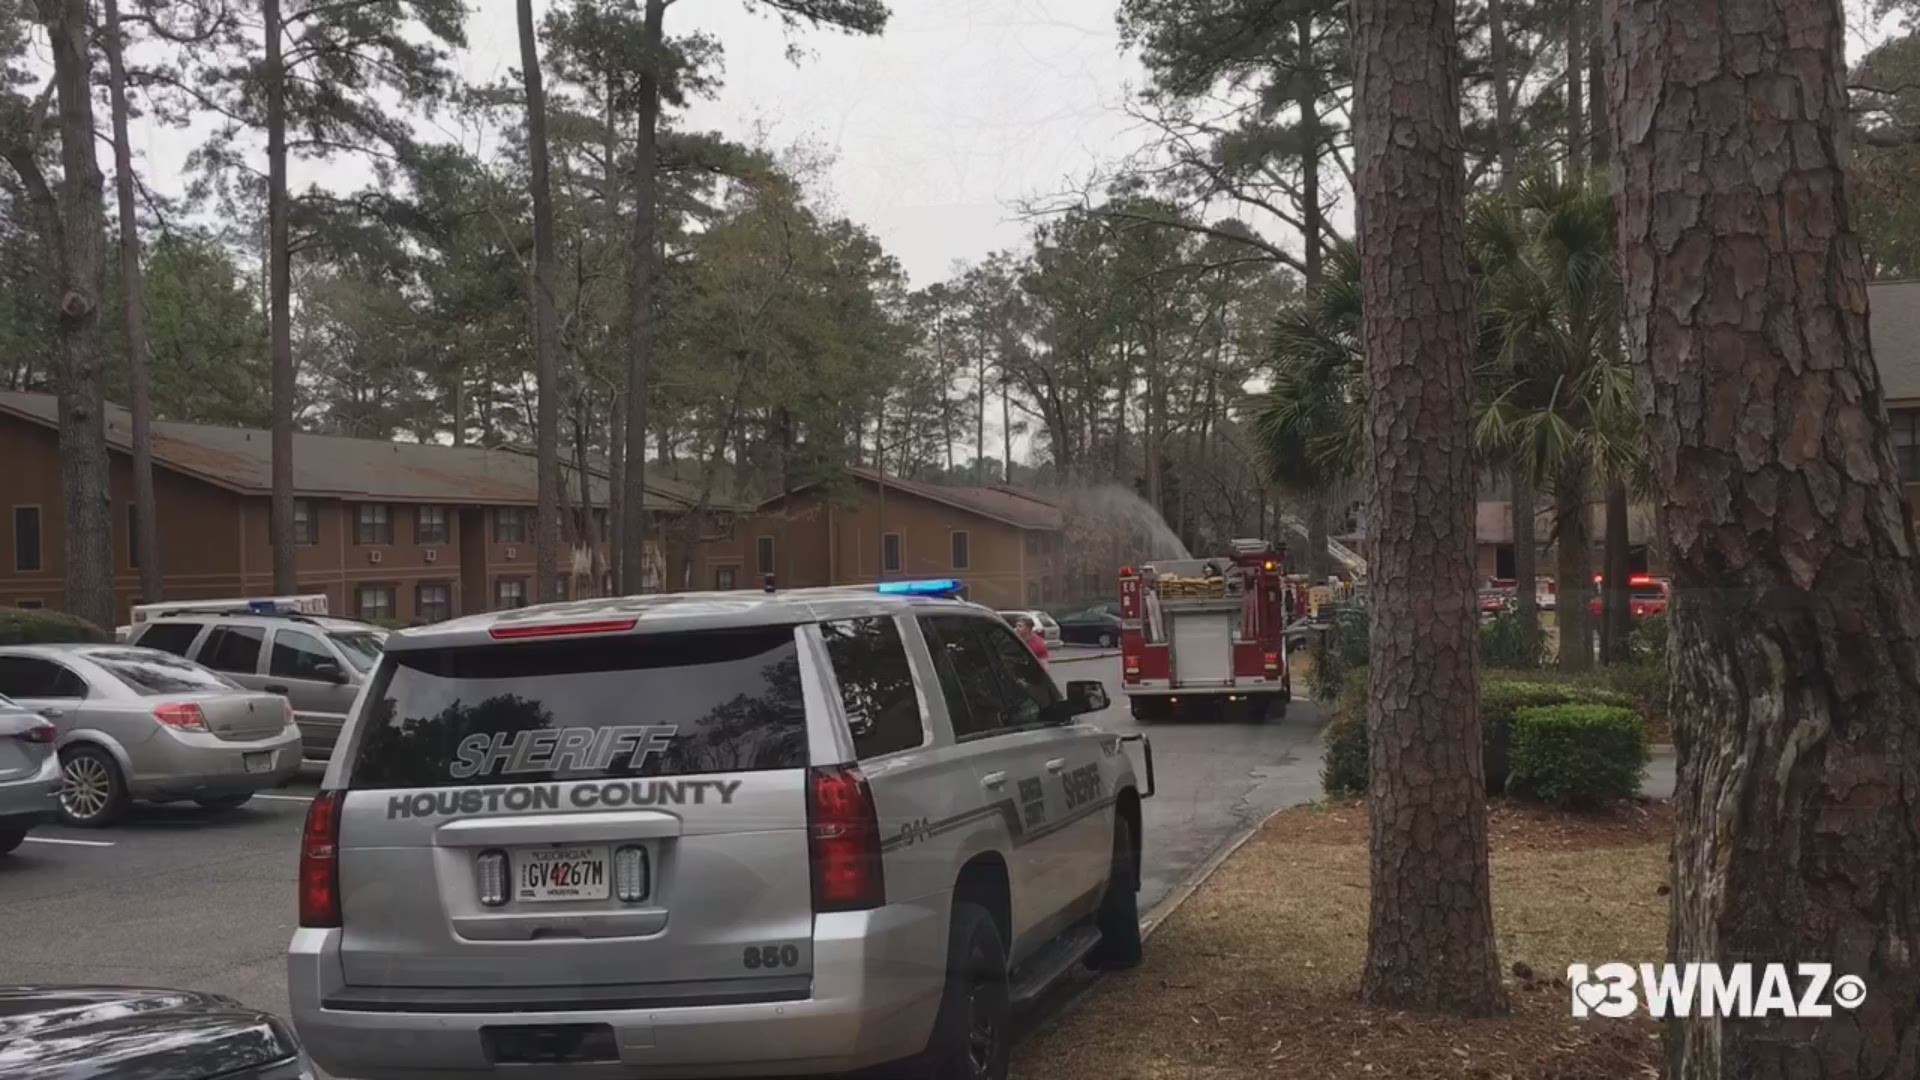 Fire crews put out a blaze in Warner Robins that burned up 16 units